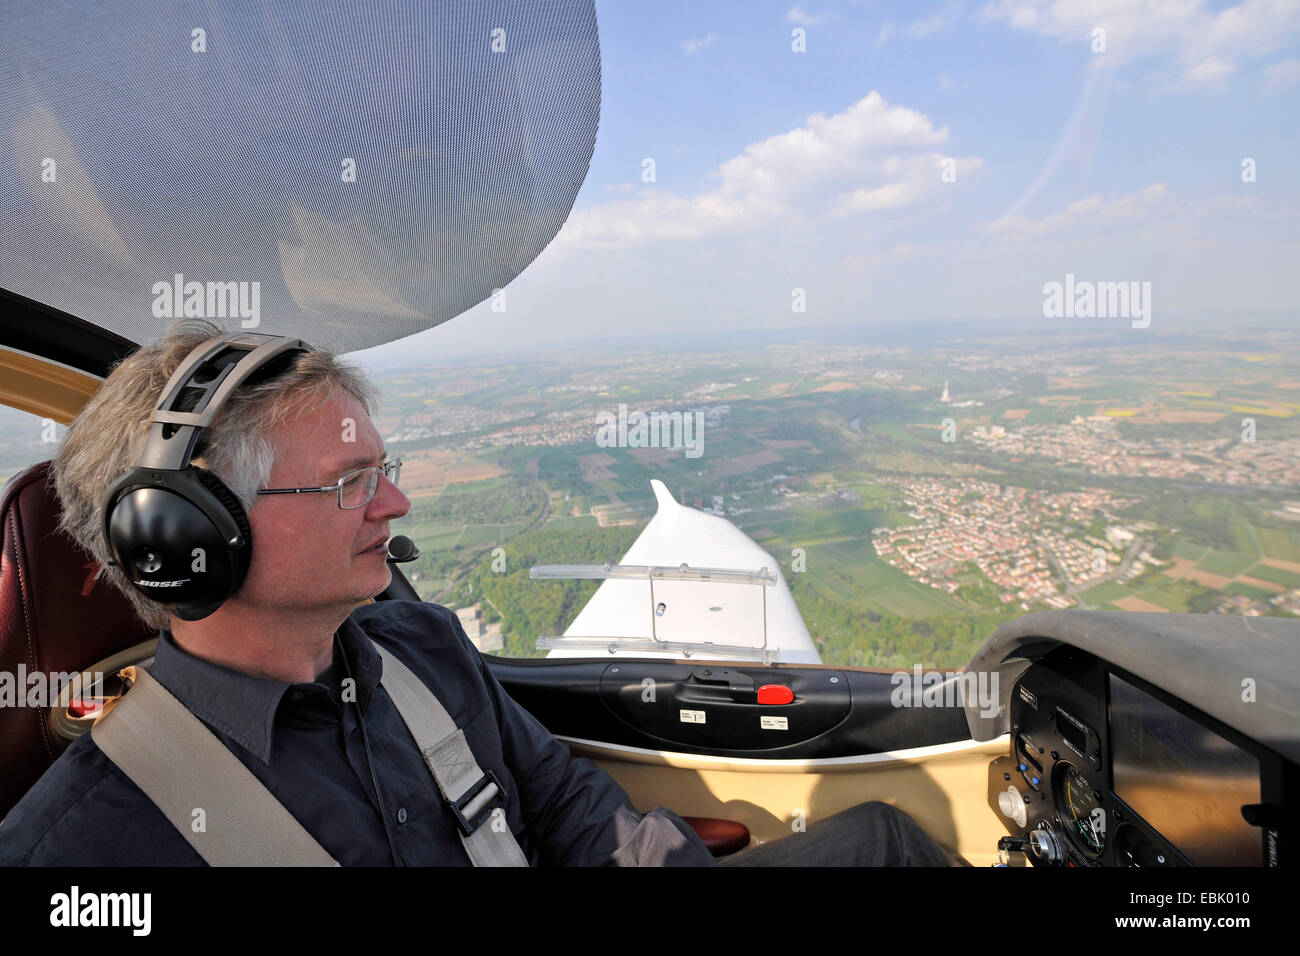 pilot in the glass cockpit of the small aircraft D-ESOA Aquila A210 AT01, Germany Stock Photo